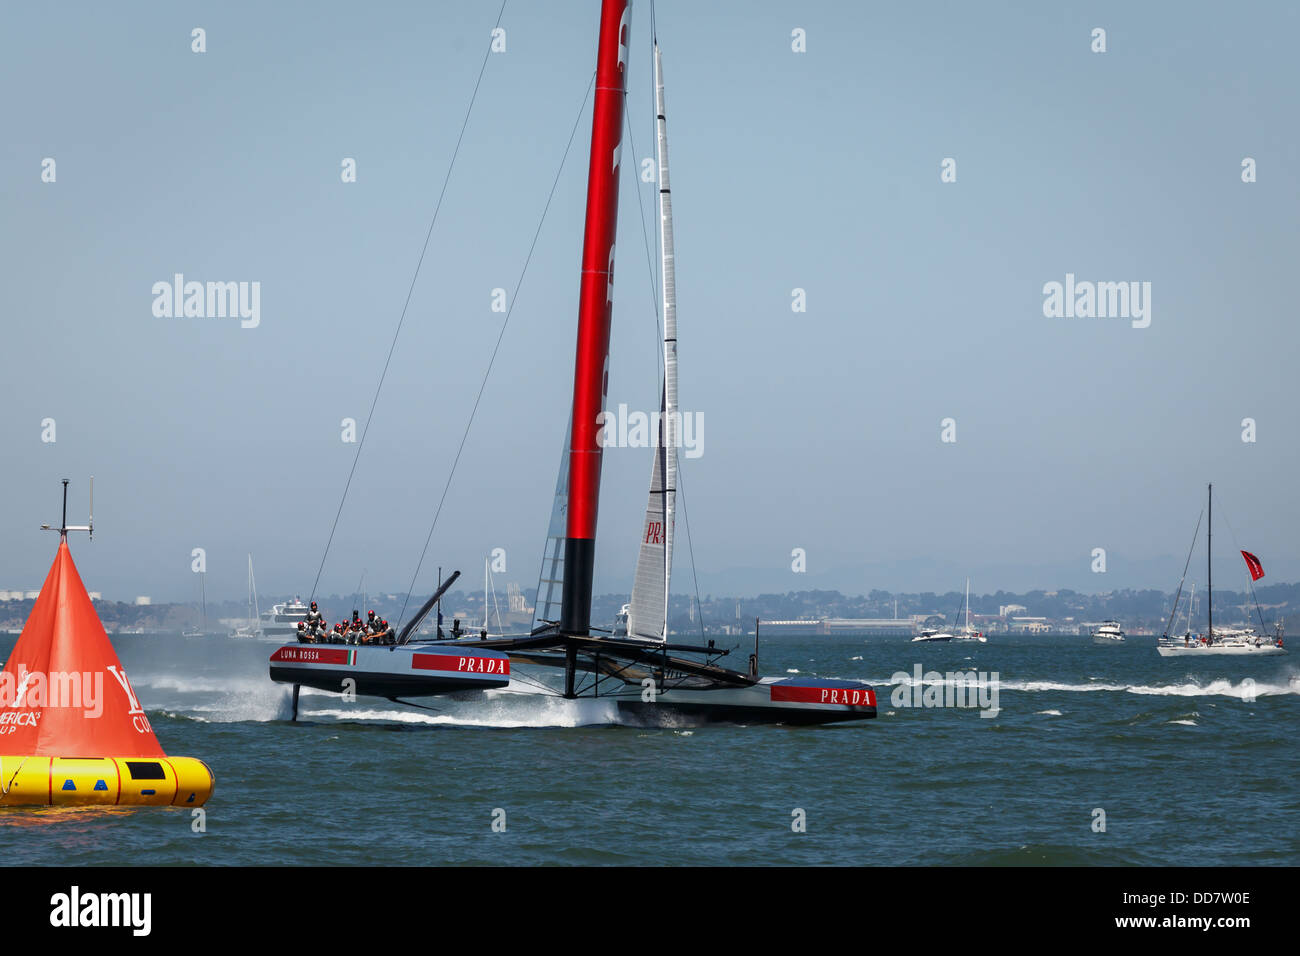 Team Luna Rossa AC 72 Sailboat crossing finish line, Louis Vuitton Cup race San Franciso Bay Stock Photo